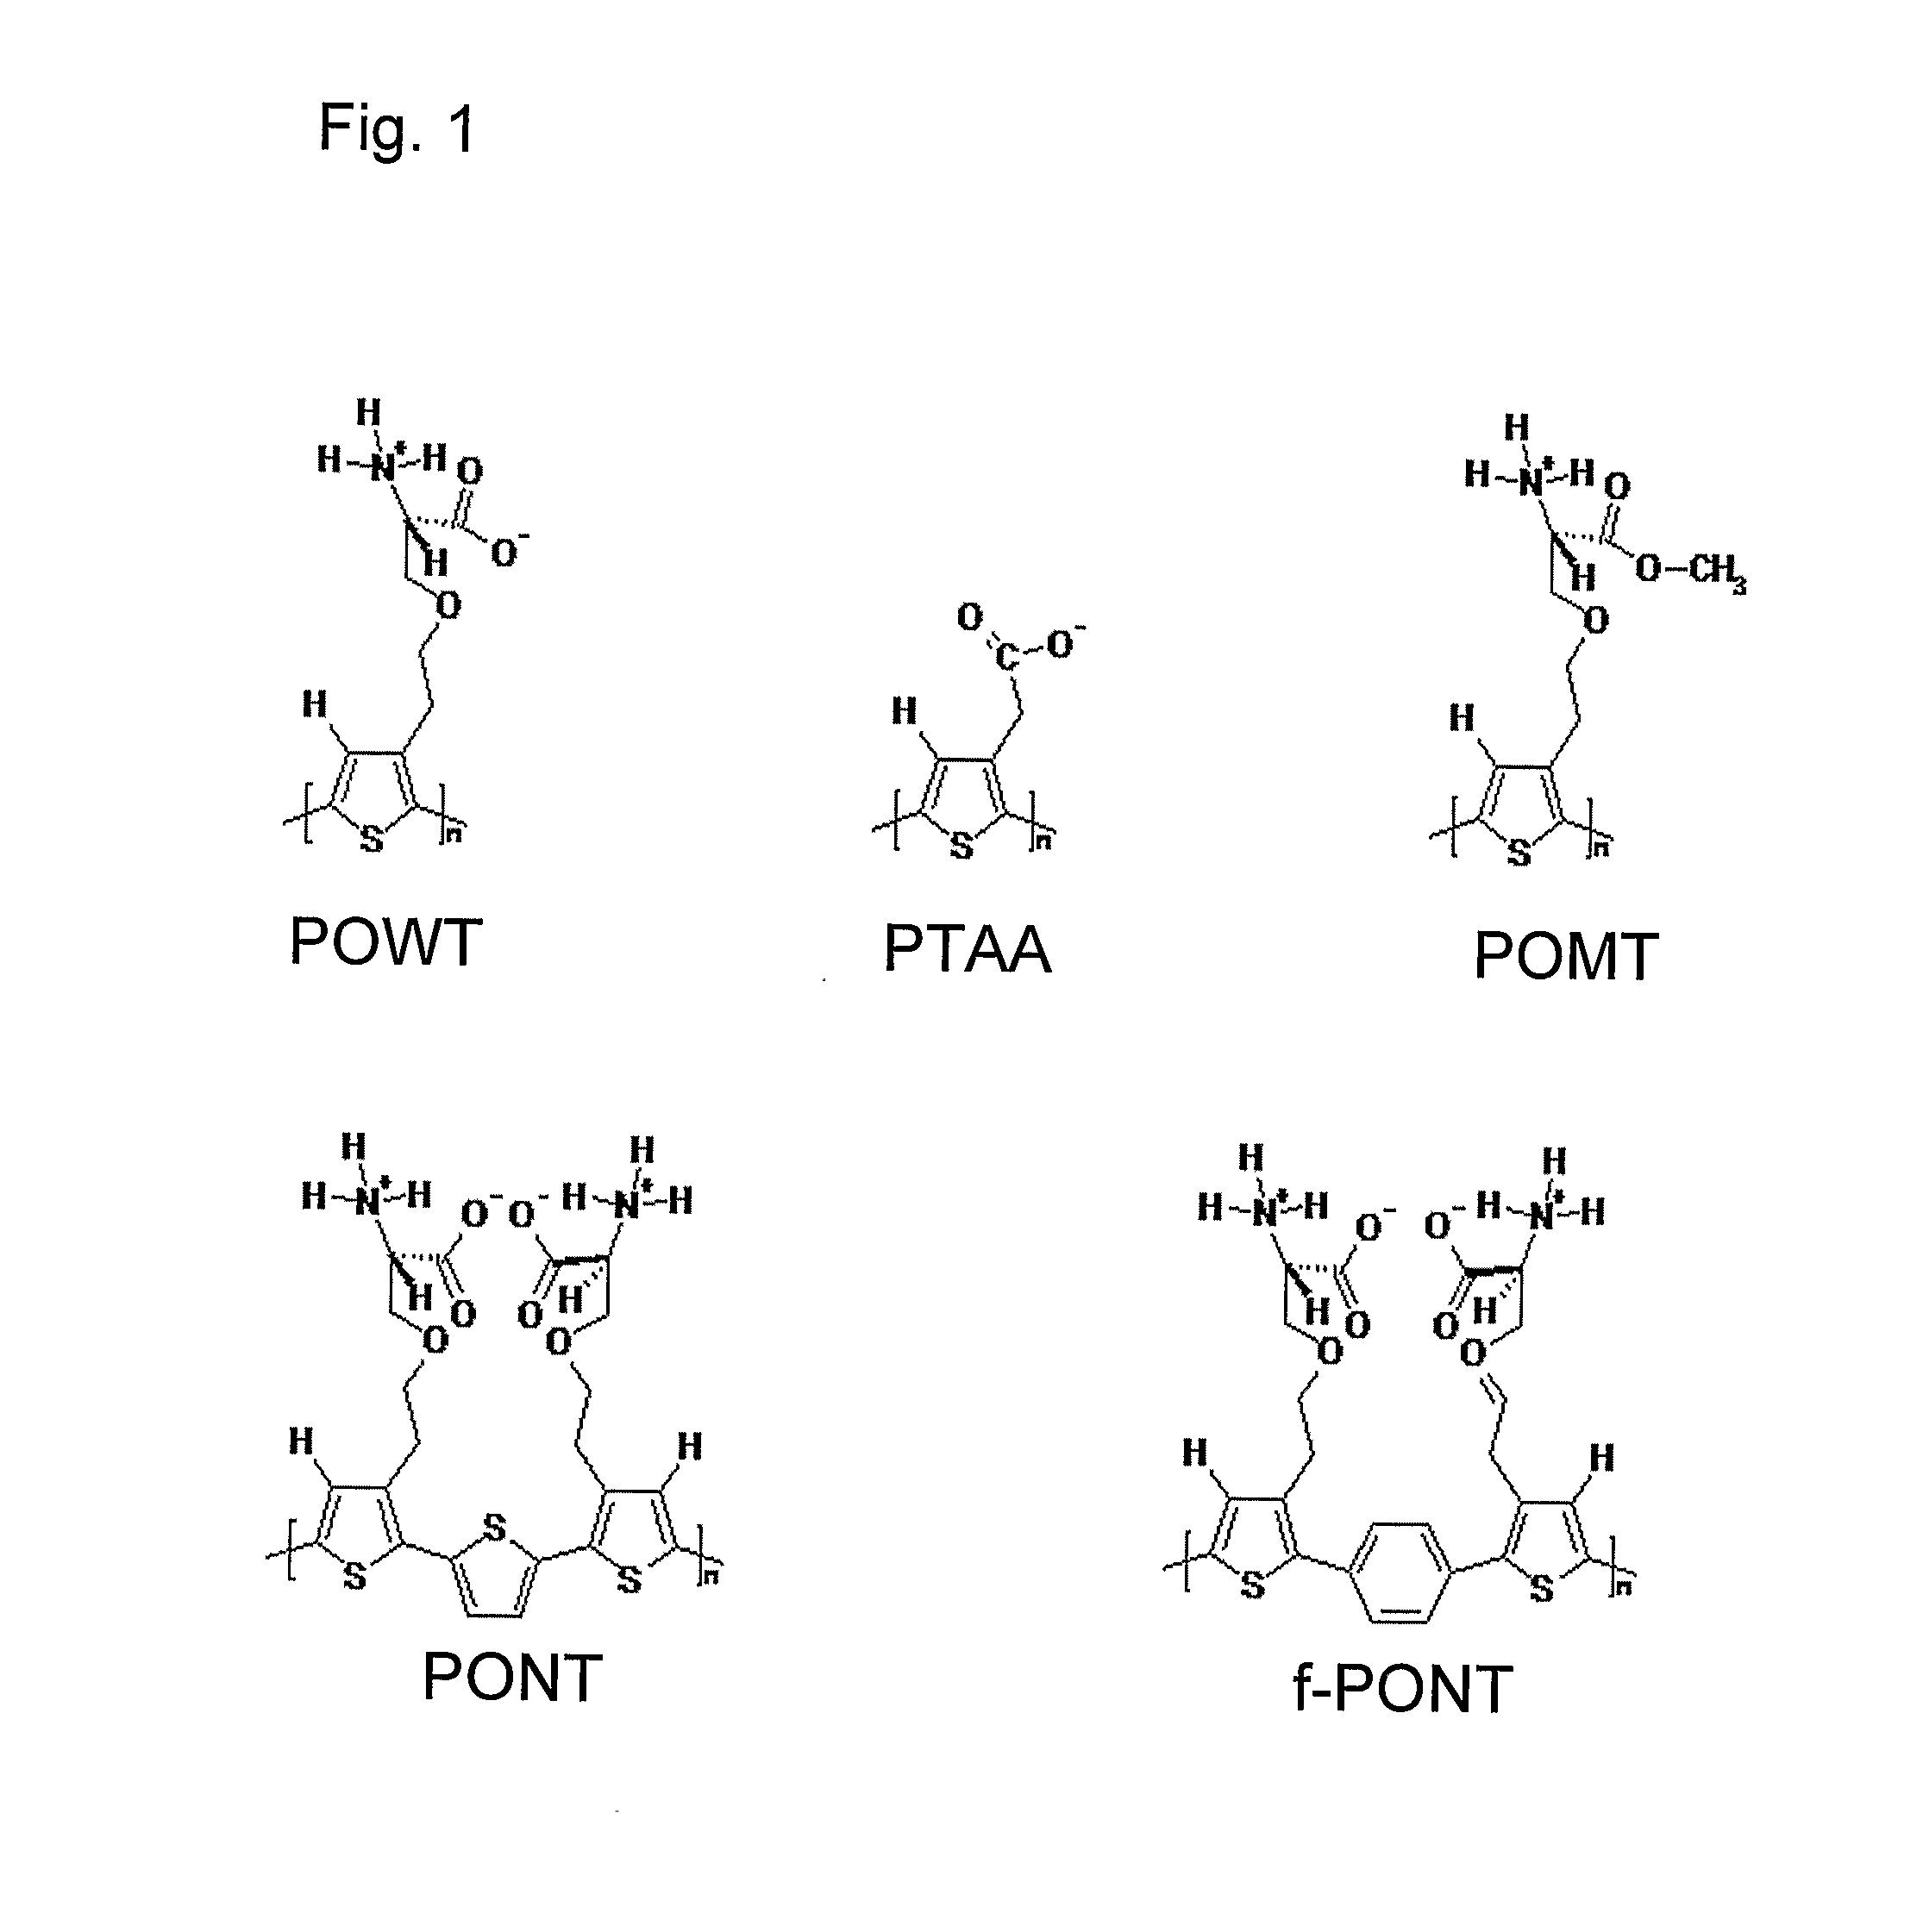 Methods for Determining Conformational Changes and Self-Assembly of Proteins